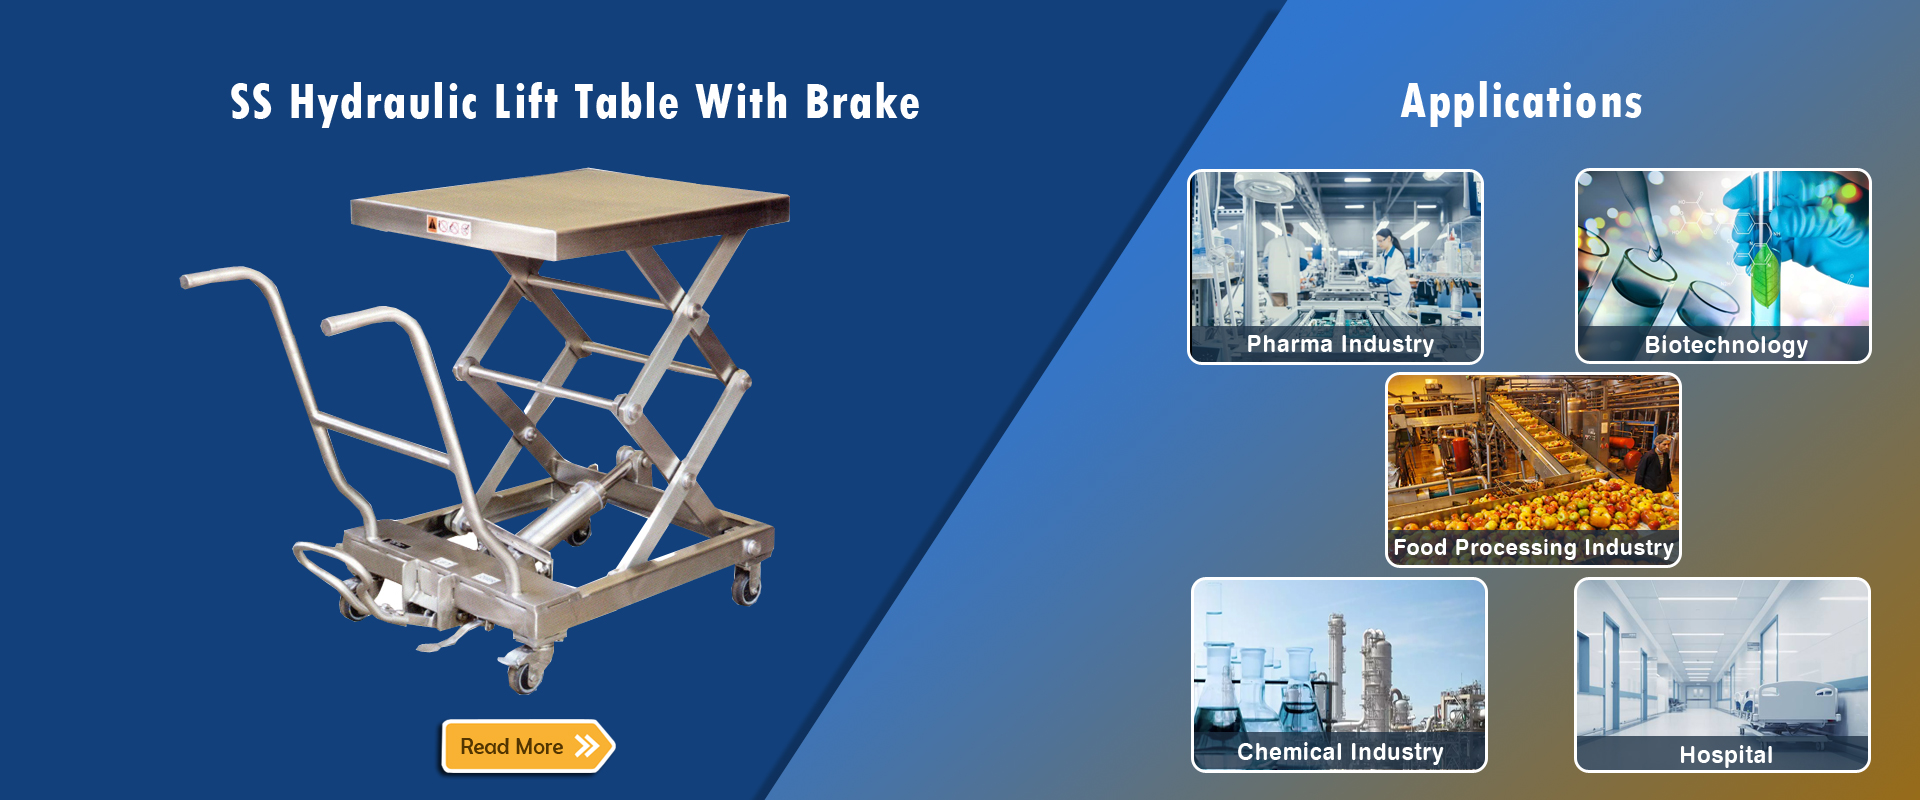 Manufacture And Supply Hydraulic Lift Table, Hydraulic Systems, Hydraulic Cylinders And Equipment, Hydraulic Systems, Special Purpose Machines, Hydraulic Manifolds Blocks, Scissor Lift, High Pressure Hydraulic Lift Table, Hydraulic Lift Table With Brakes